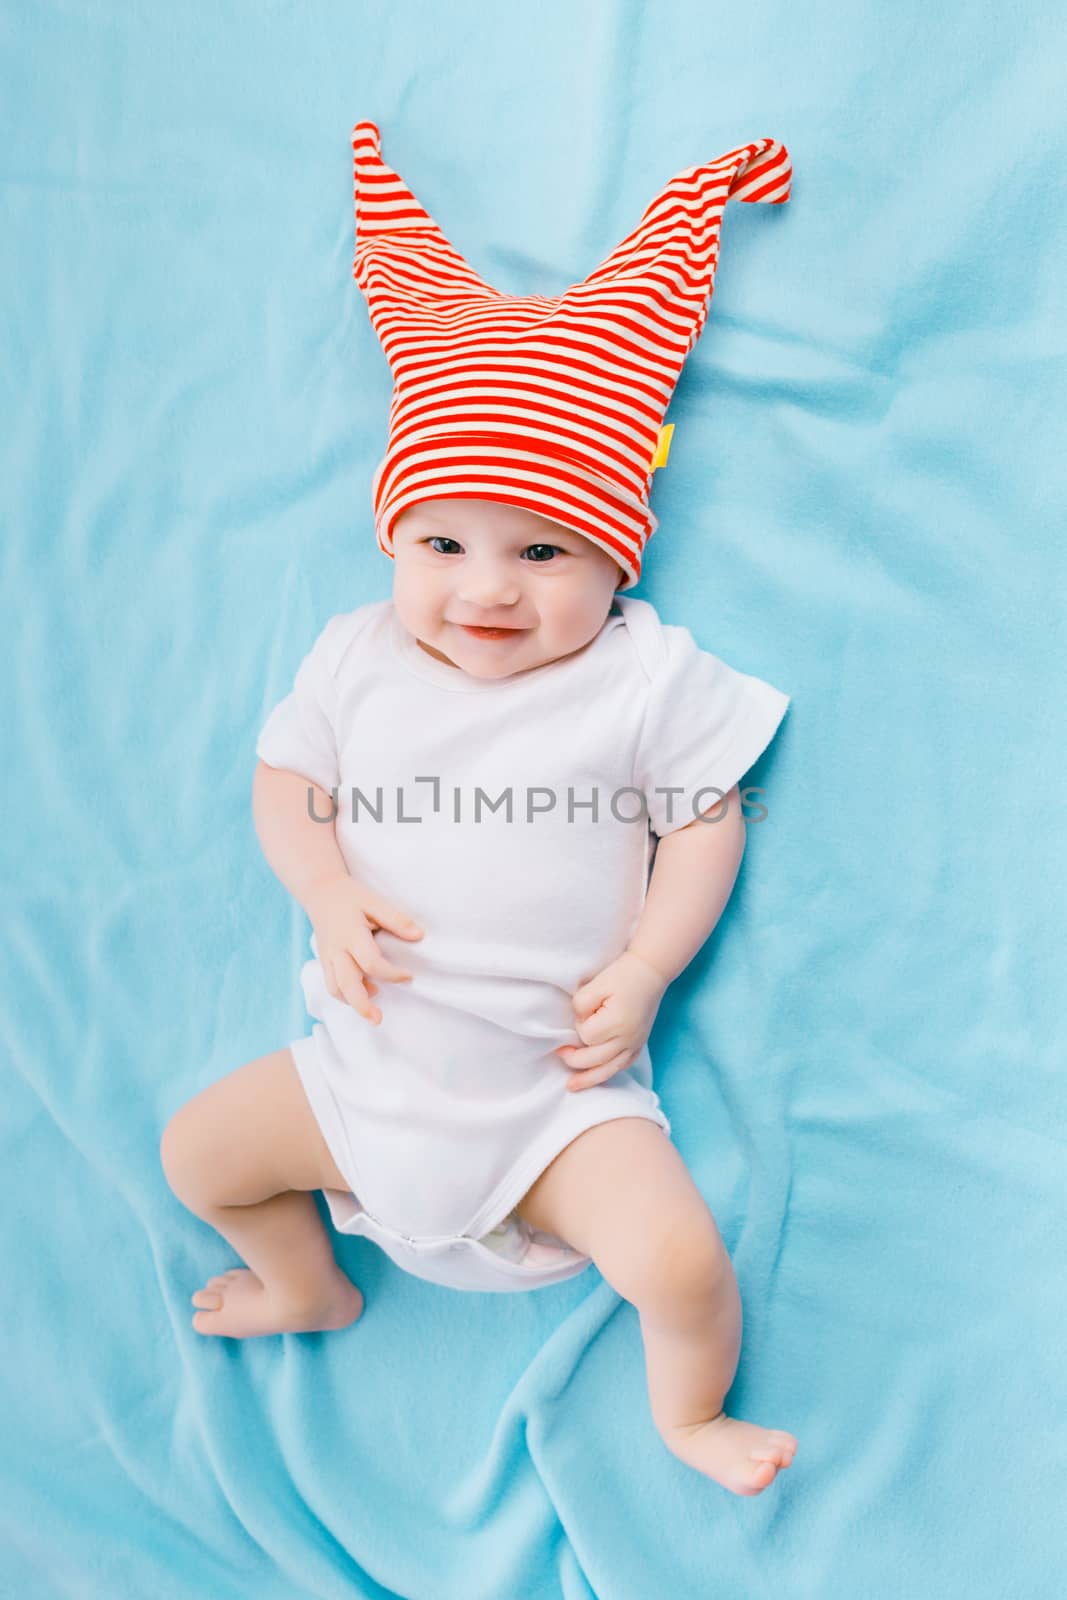 toddler in a striped hat on a blue blanket by pzRomashka